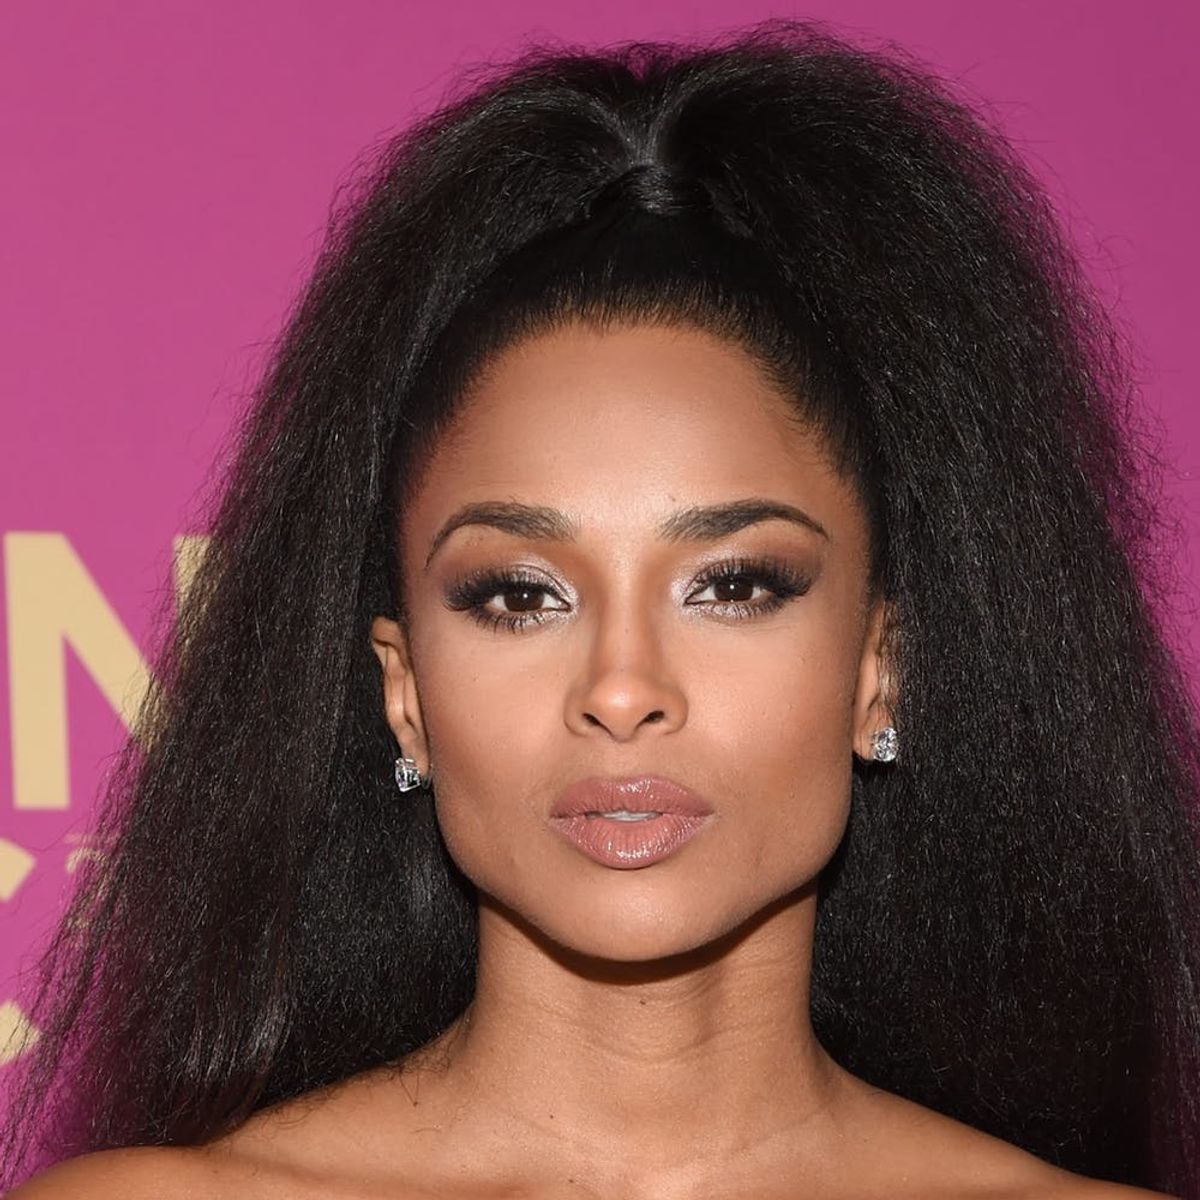 Ciara’s Curly Retro ‘Do Is Giving Us *MAJOR* ‘Flashdance’ Vibes